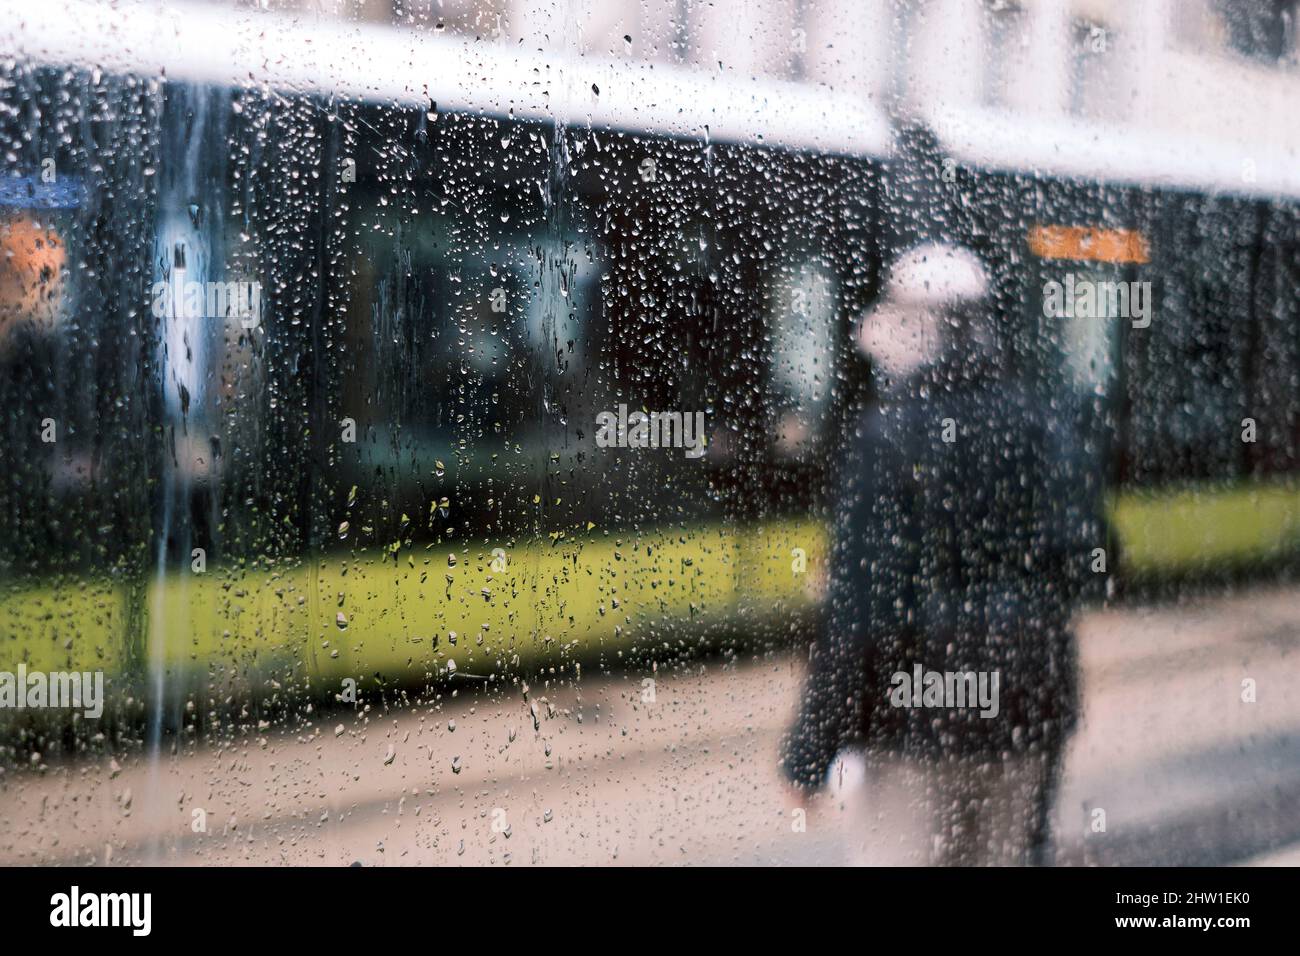 France, Finistere, Brest, man at the streetcar stop on rue de Siam in rainy weather Stock Photo